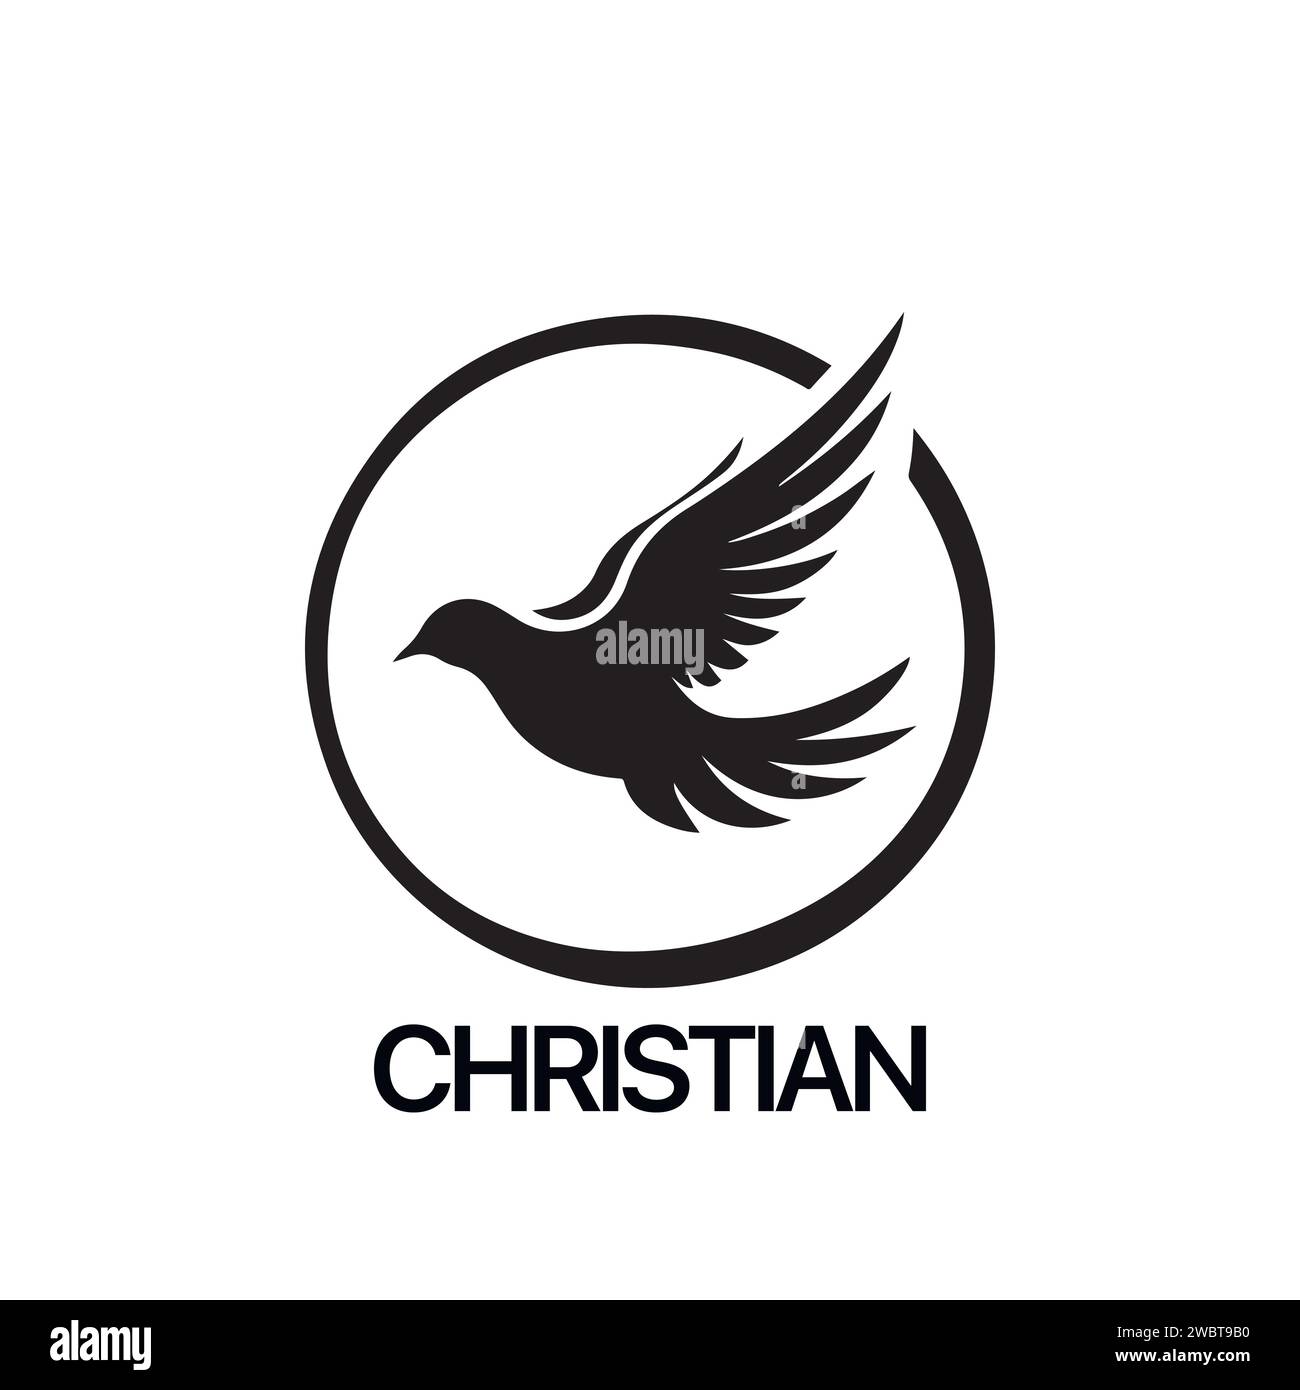 Christian Logo template with dove, pigeon. Black and white christian holy spirit symbol Stock Vector